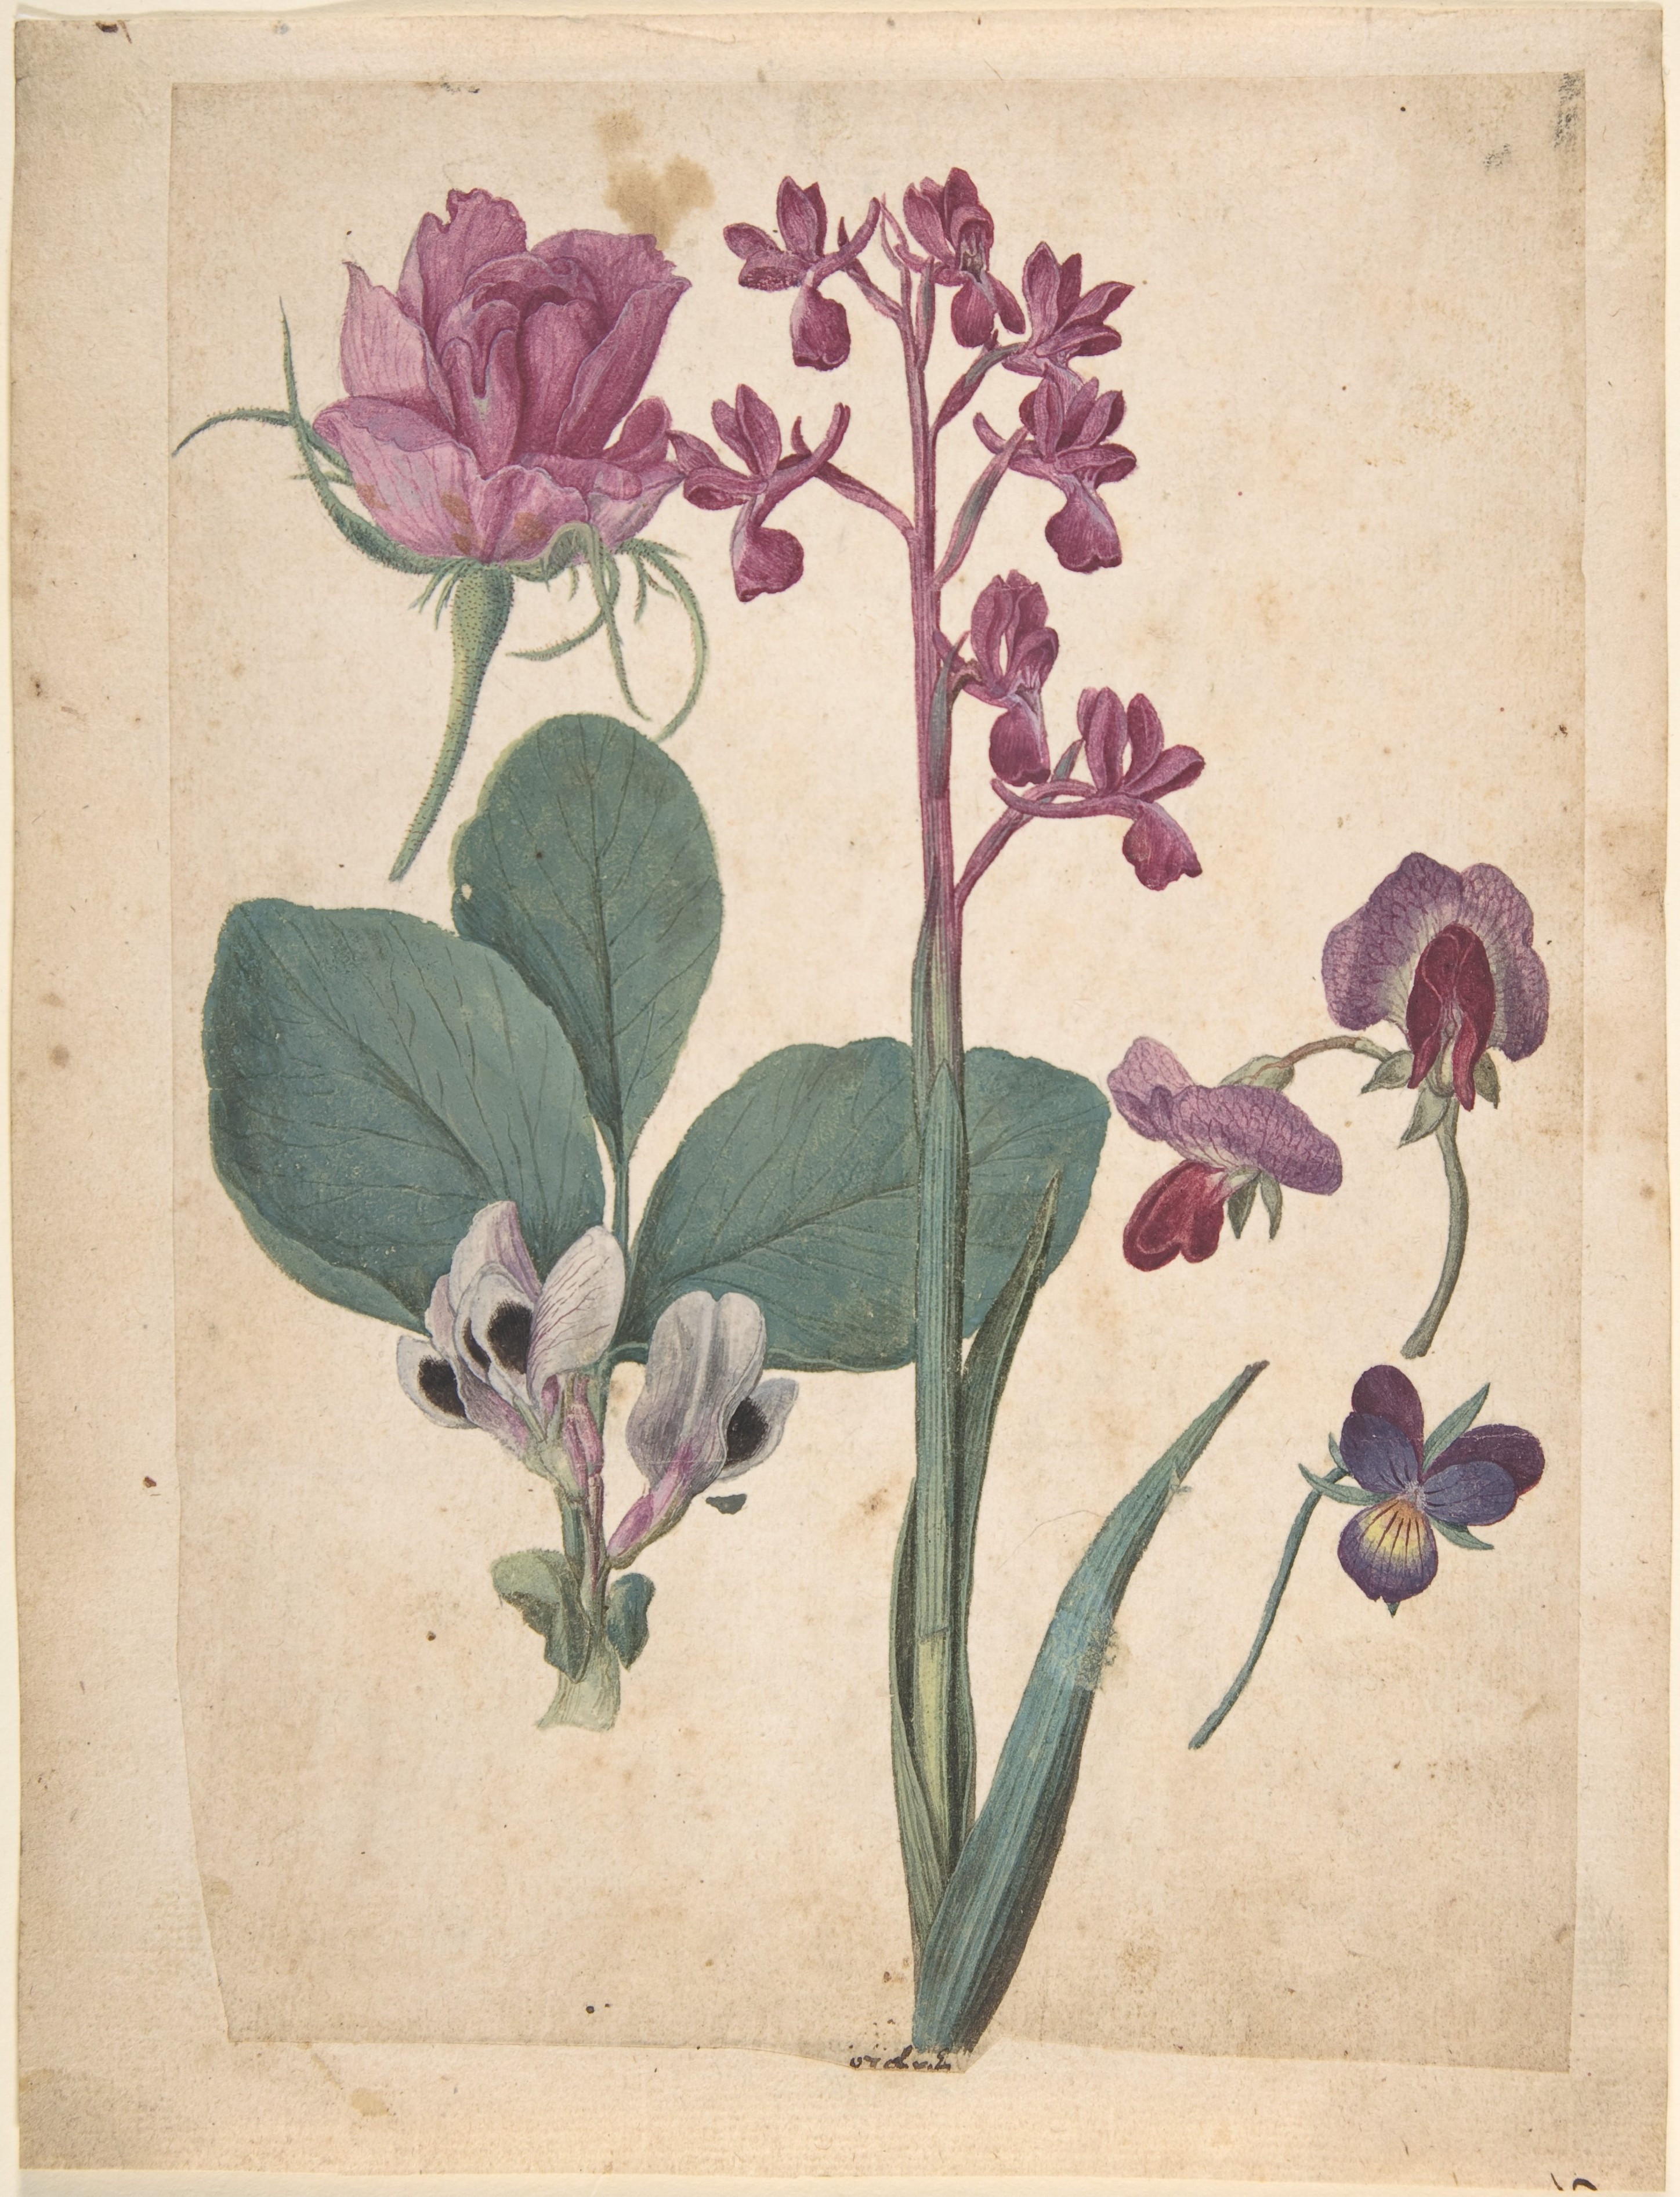 Jacques le moyne de mues a sheet of studies of flowers a rose a heartsease a sweet pea a garden pea and a lax